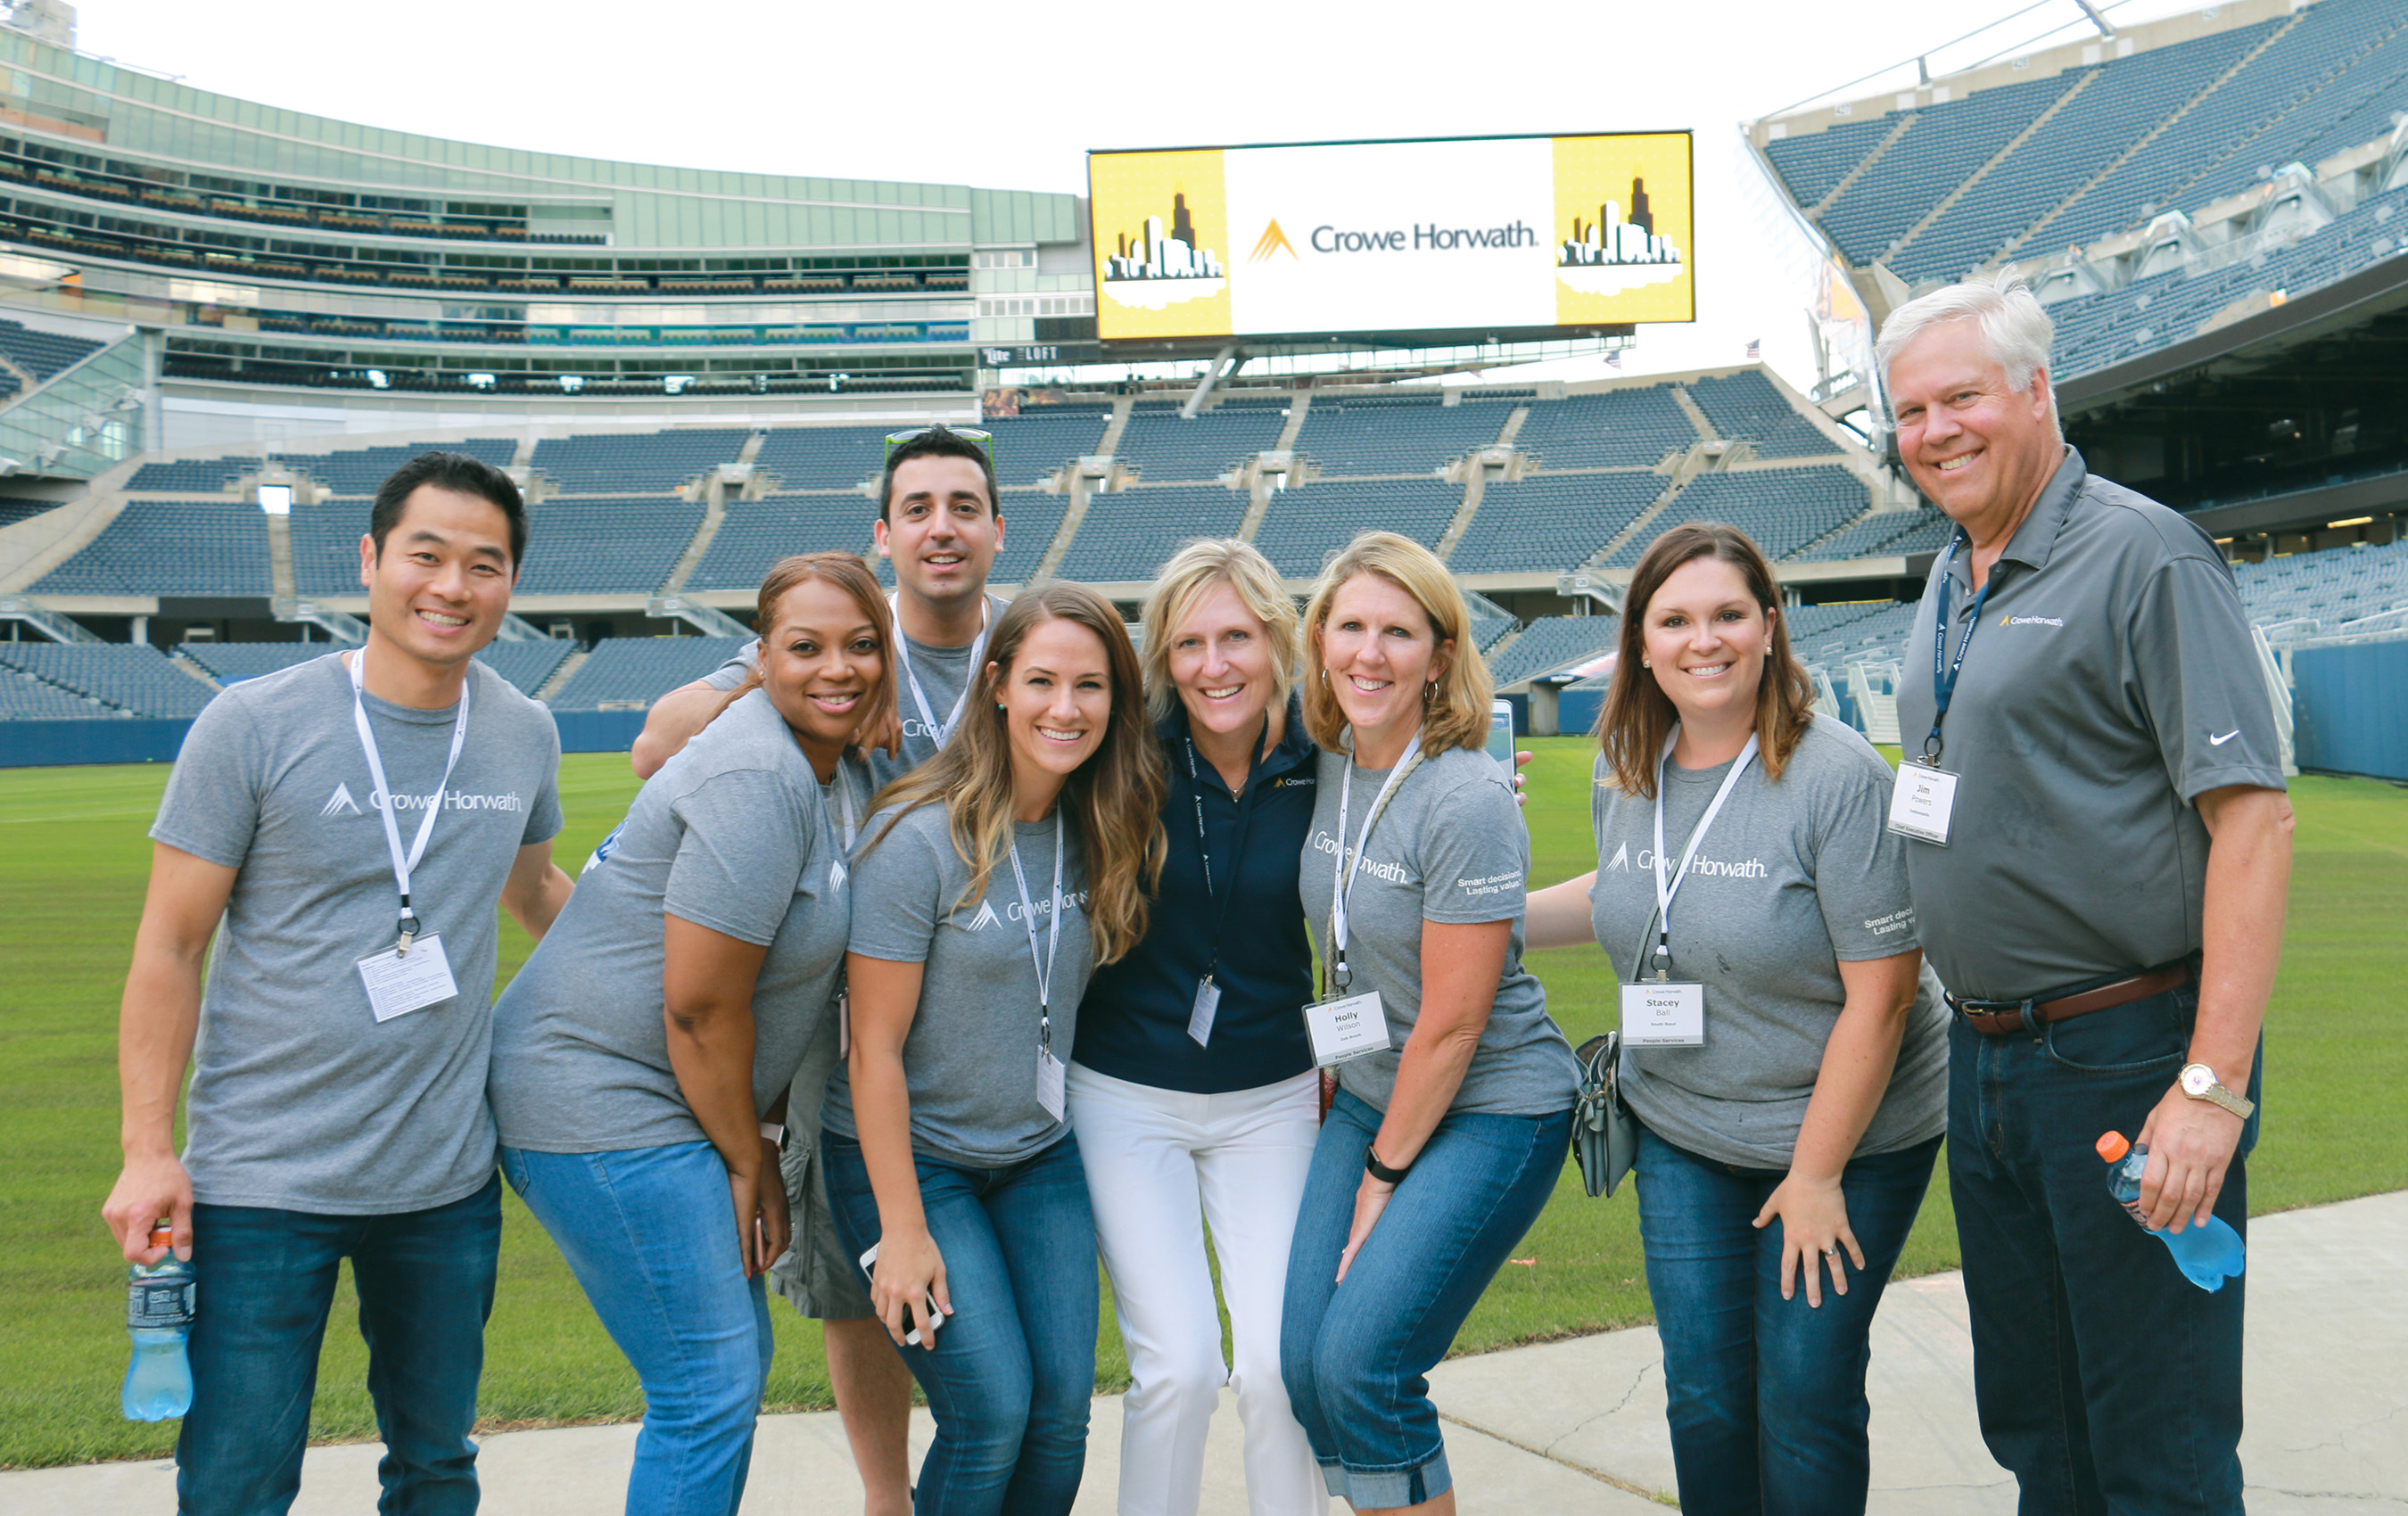 Participants at the Crowe Learn2Lead program, a national leadership program for high-achieving students, enjoy an evening outing at Soldier Field in Chicago.           